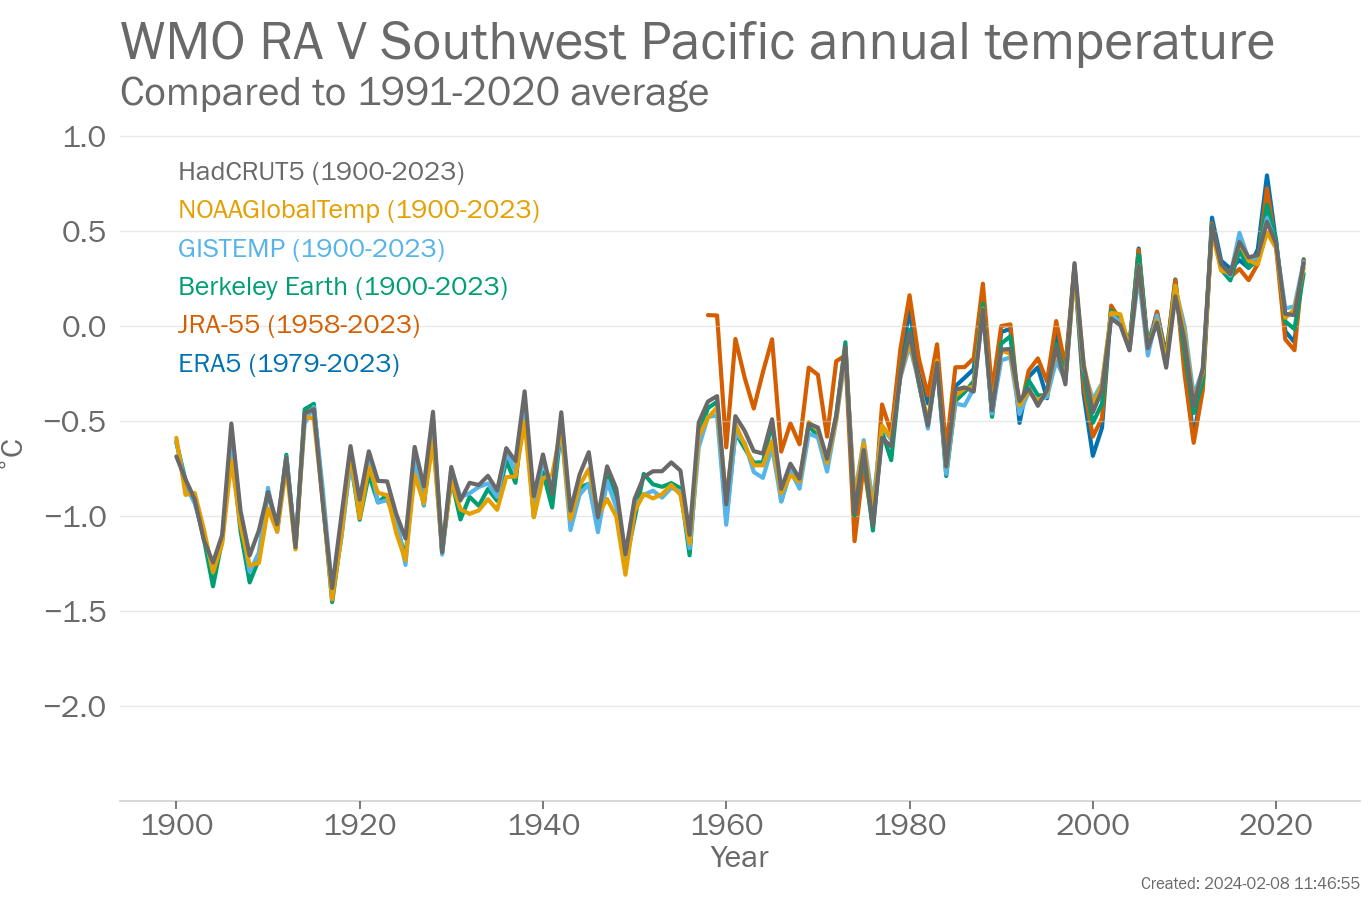 Annual Regional mean temperature for WMO RA 5 South-West Pacific (°C, difference from the 1991-2020 average)  from 1900-2023. Data are from the following six data sets: Berkeley Earth, ERA5, GISTEMP, HadCRUT5, JRA-55, NOAAGlobalTemp.